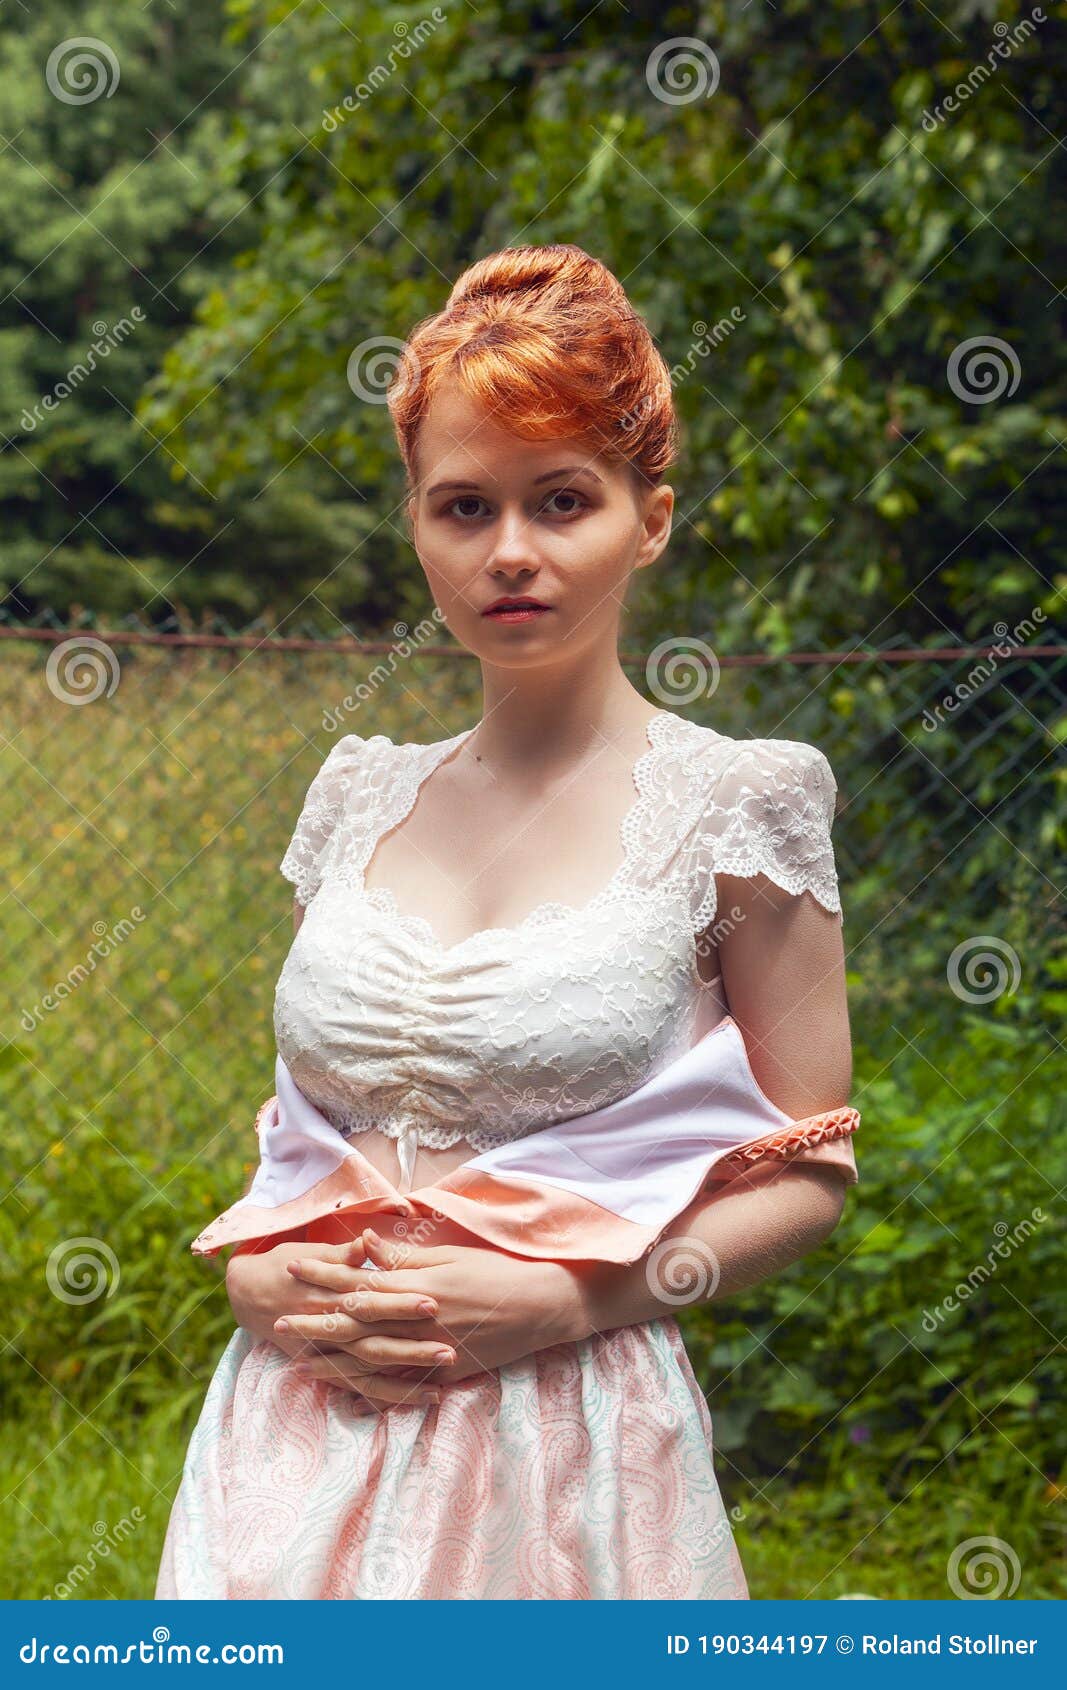 Portrait of a Bavarian Young Woman with Dirndl Blouse Stock Image - Image  of clothing, park: 190344197